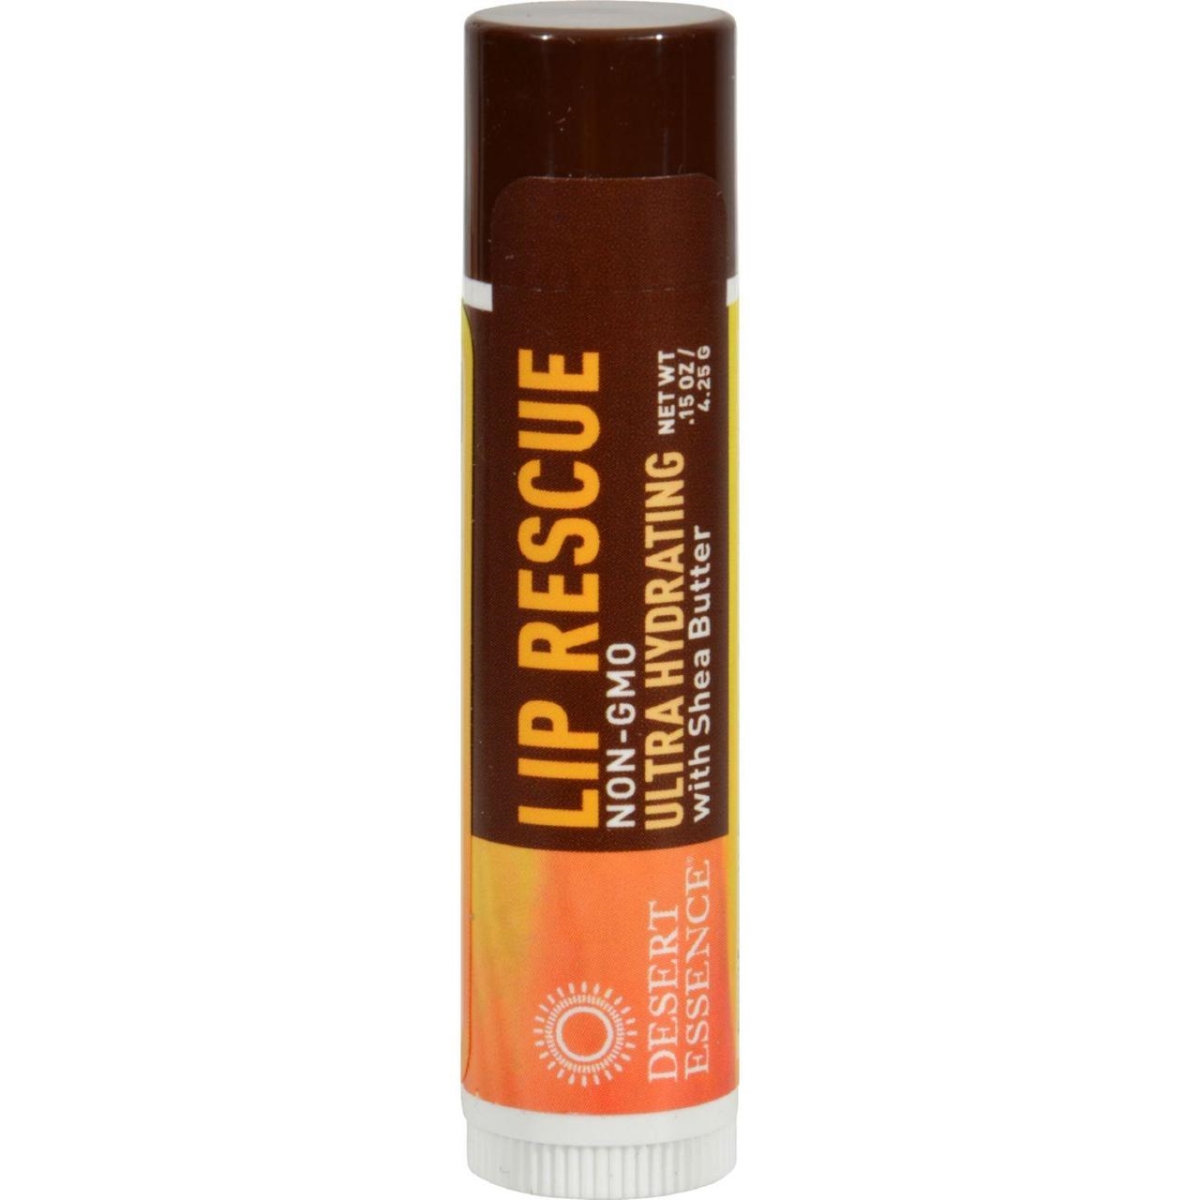 Hg0970954 0.15 Oz Lip Rescue With Shea Butter, Case Of 24